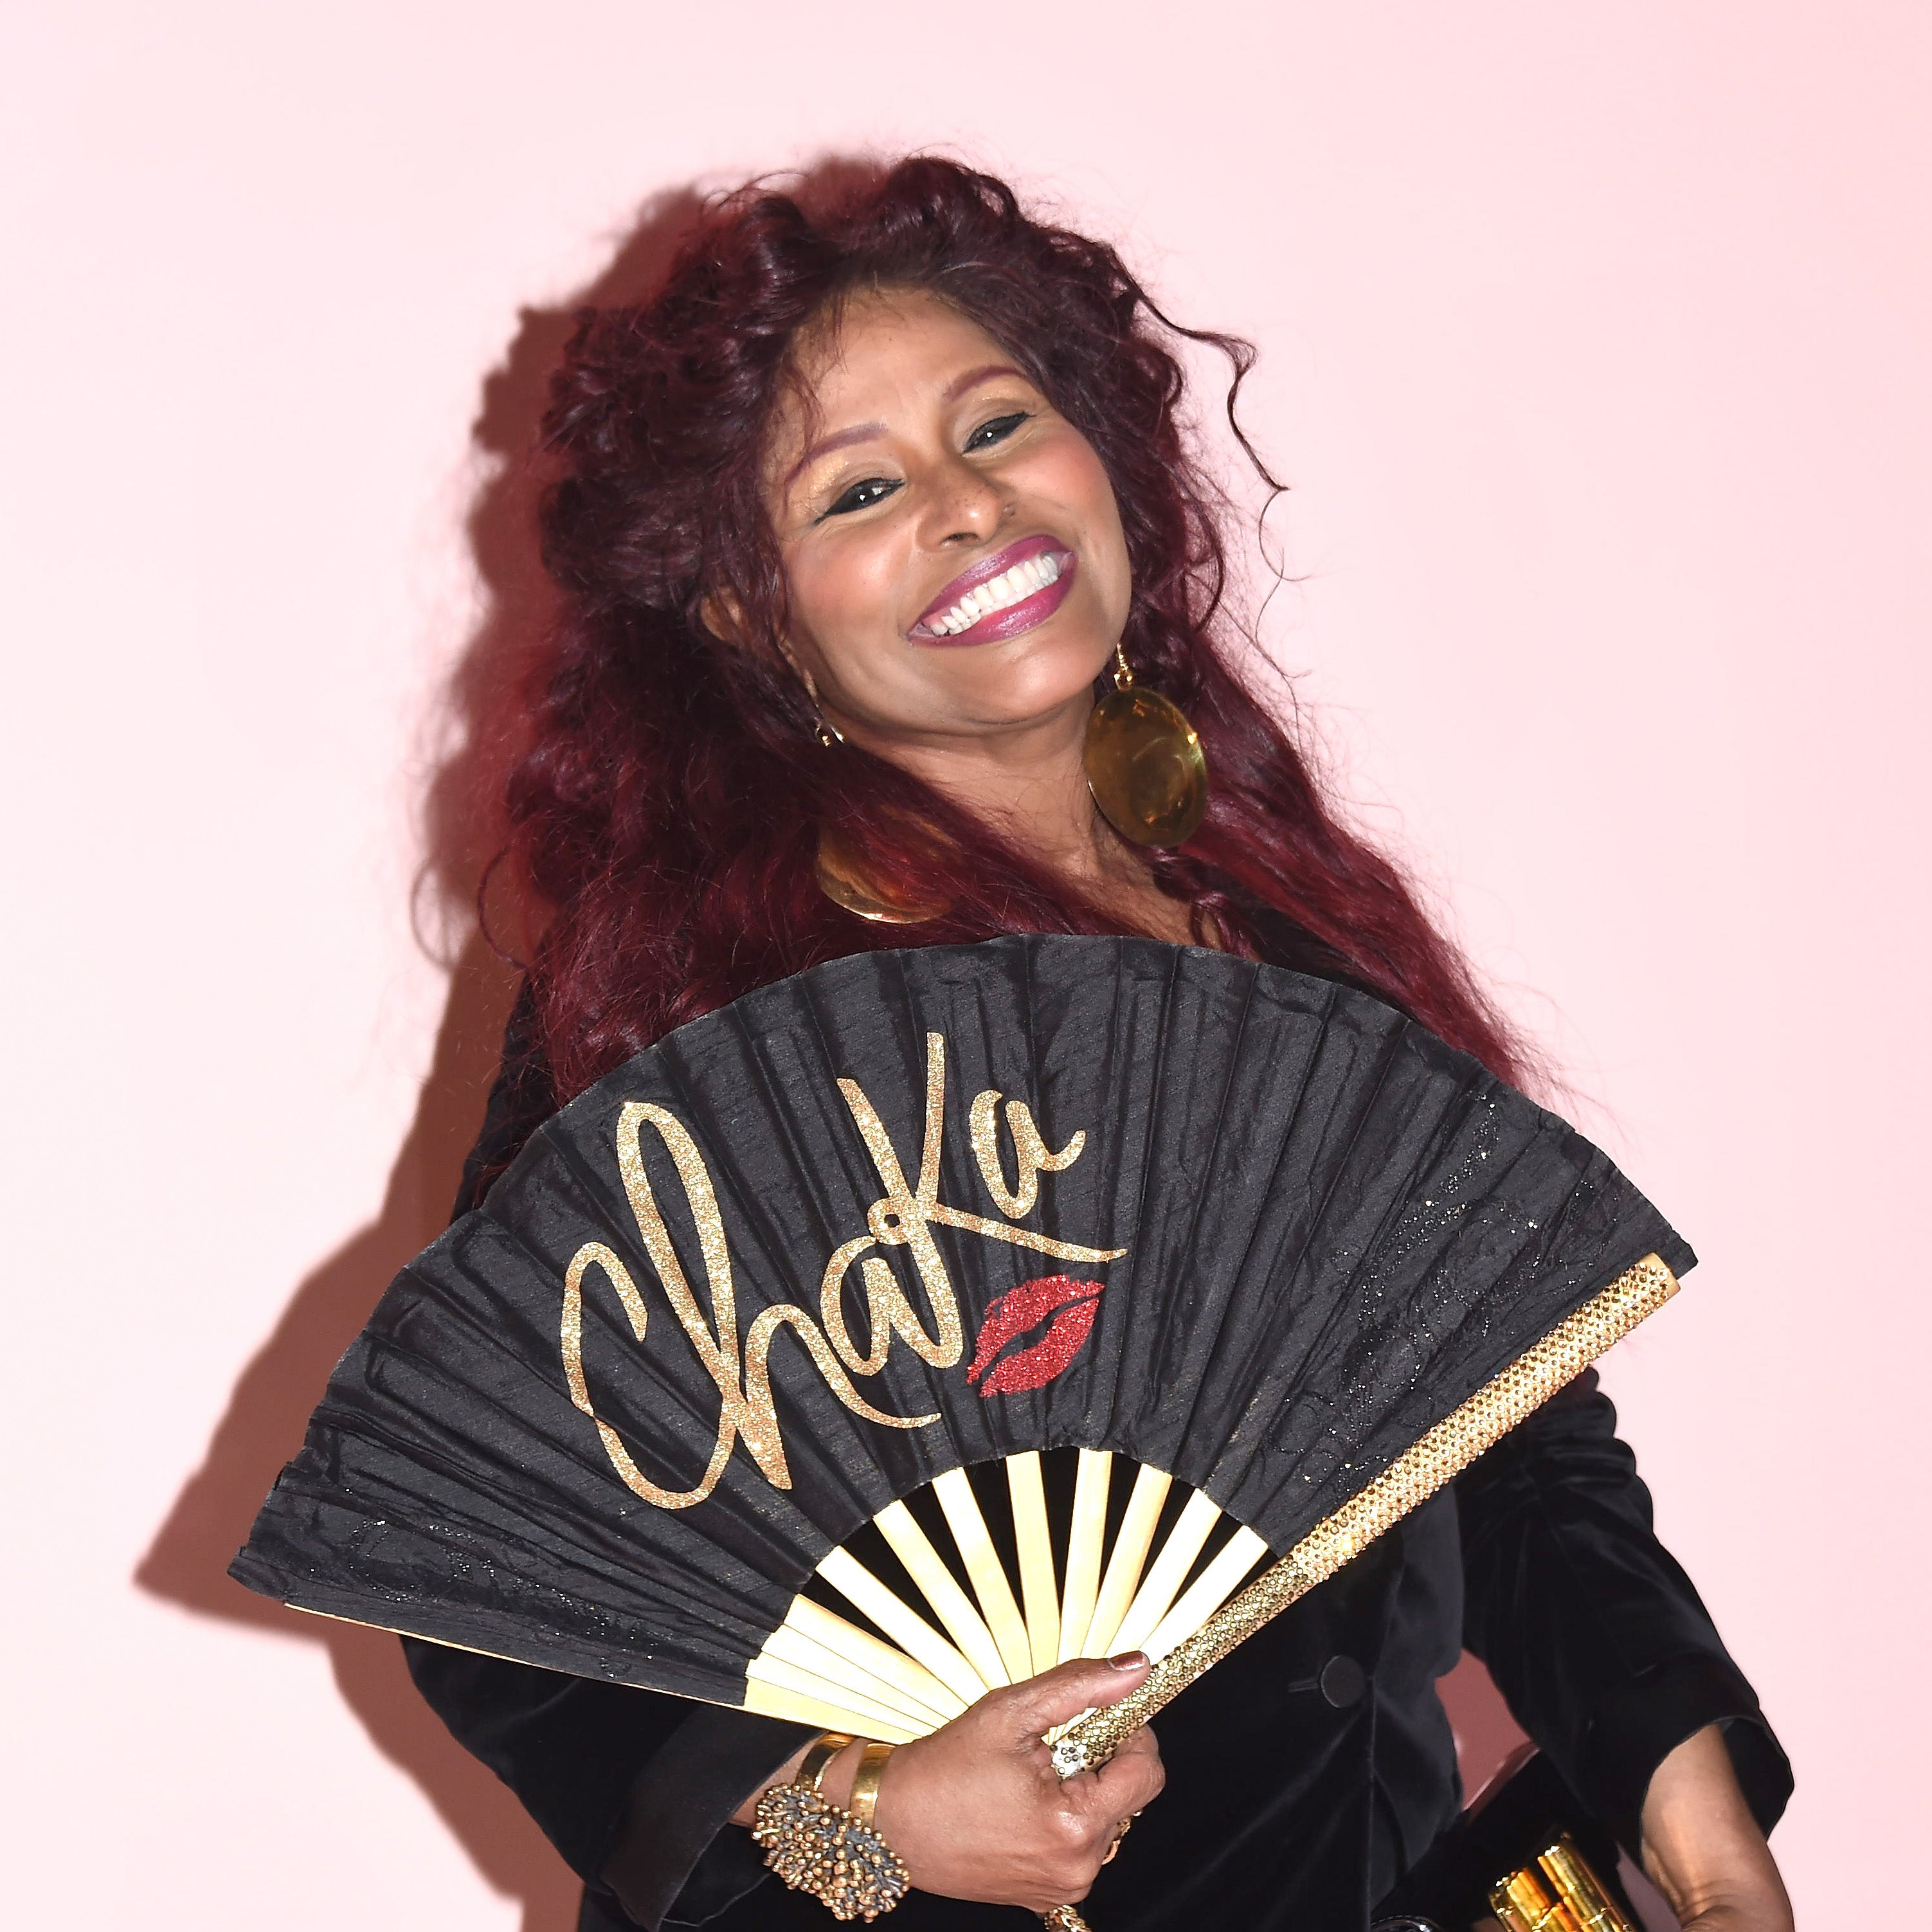 Chaka Khan Just Spilled All of Her Iconic Makeup Secrets in a Video, and We Can't Stop Watching 
